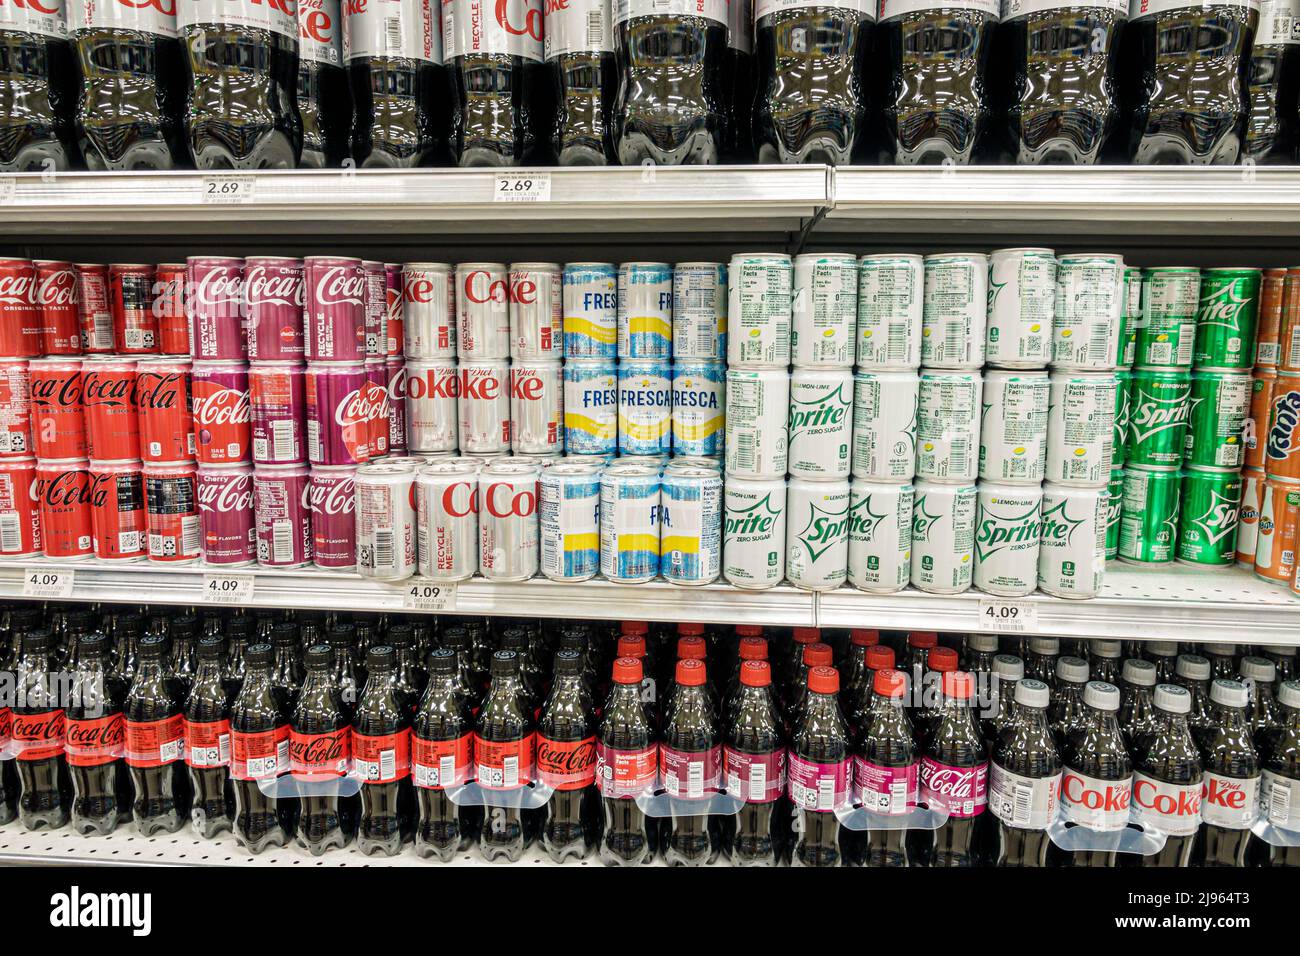 Miami Beach Florida,Publix grocery store supermarket display sale shelf shelves inside interior,Coca Cola products soft drinks cola soda cans bottles, Stock Photo